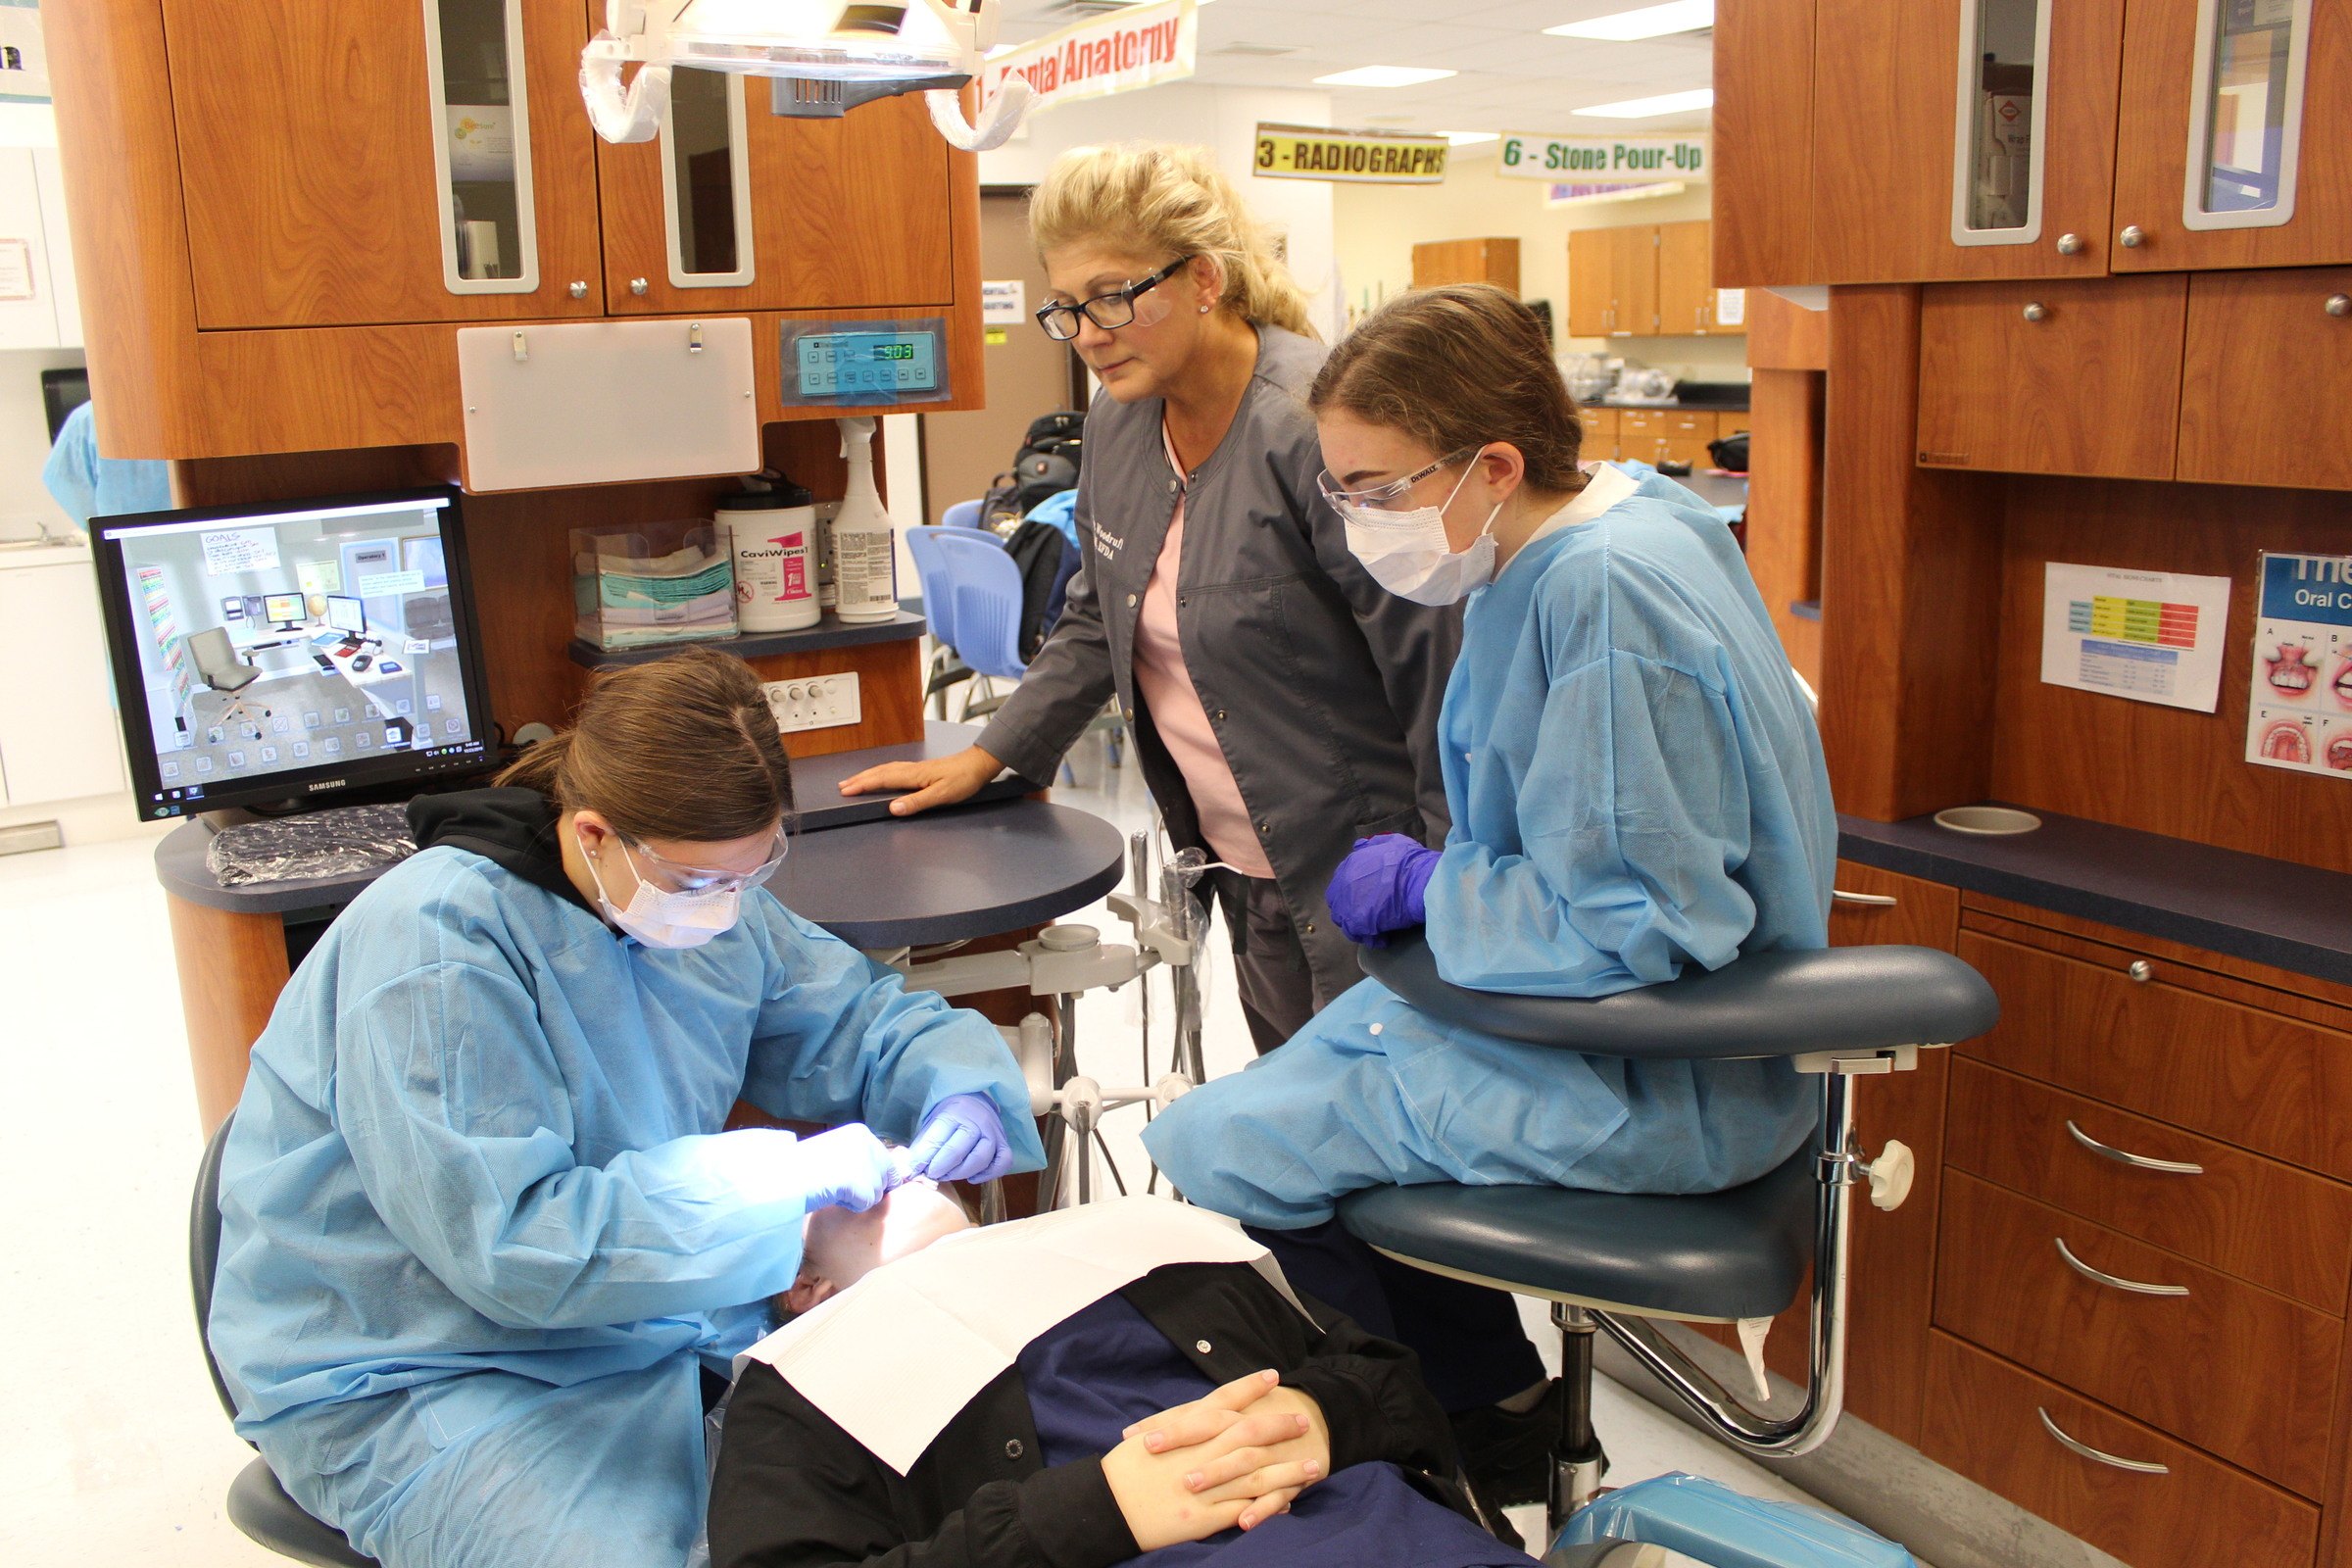 Instructor Nancy Woodruff observes students in the operatory